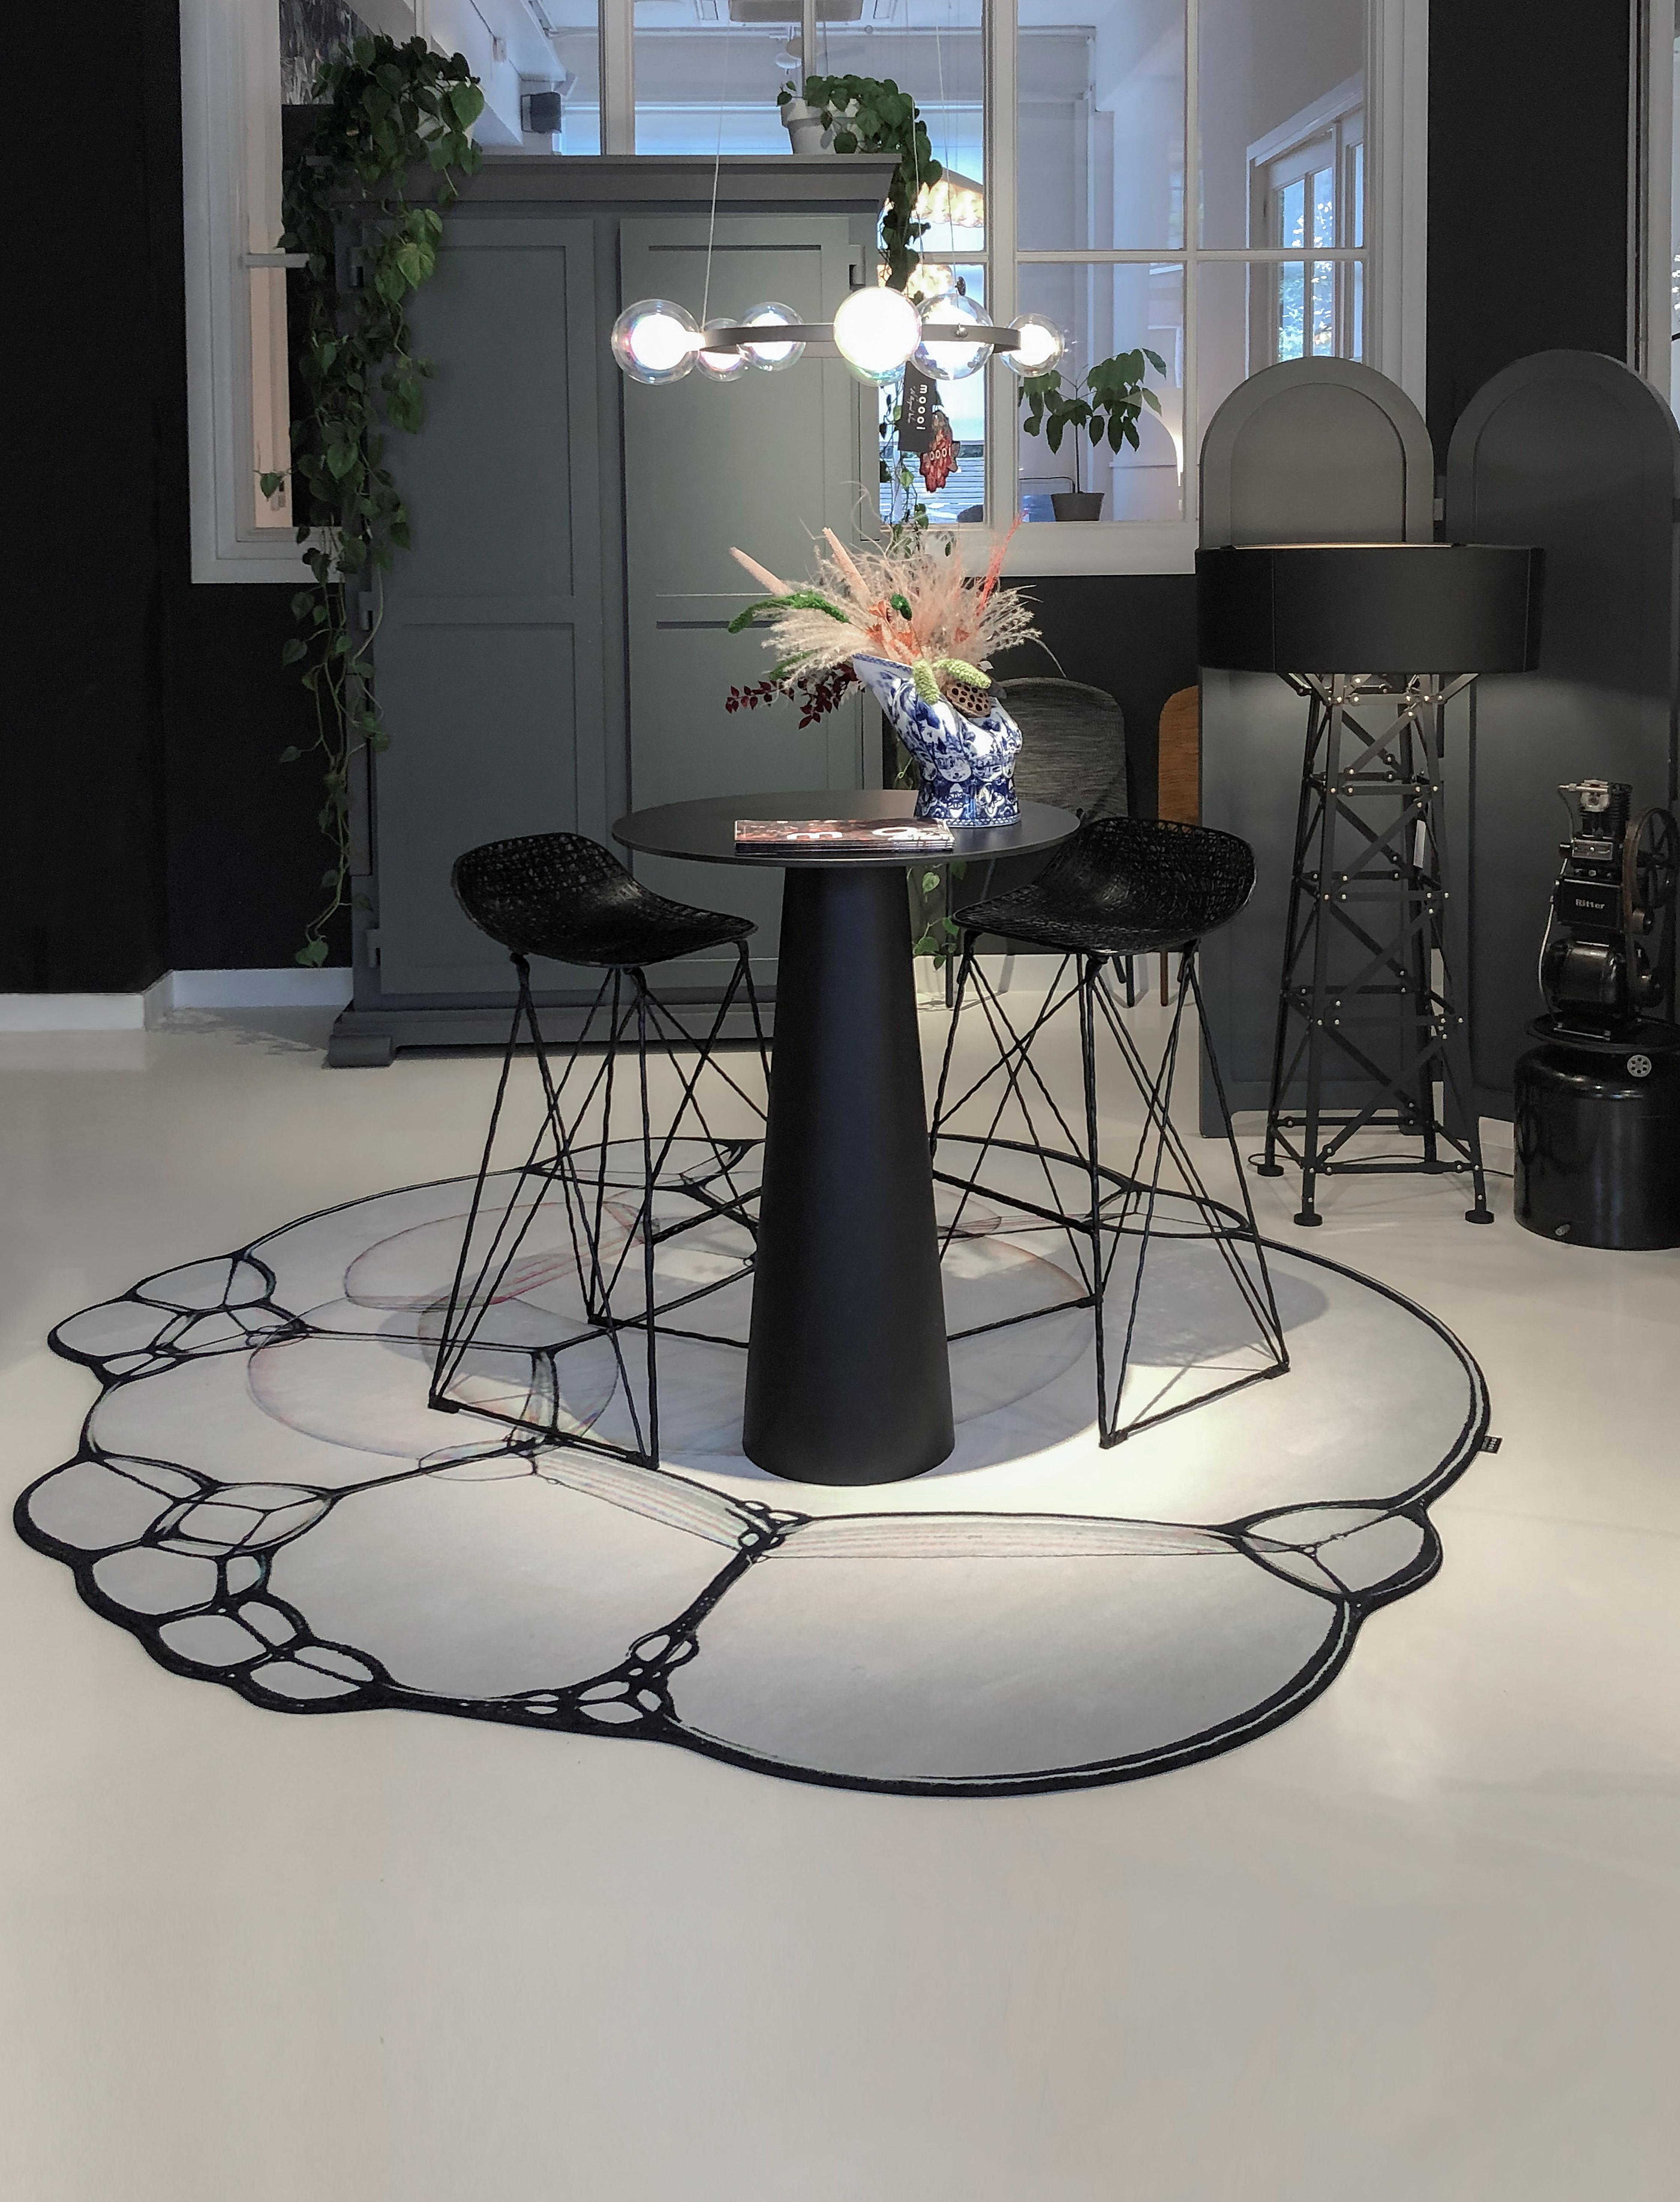 Moooi large bubble natural zoom rug in wool with blind hem by Sjoerd Vroonland

Sjoerd Vroonland is a master of revised crafts and a remarkable furniture designer. Best known for his “extension chair” that became an instant icon of the Dutch